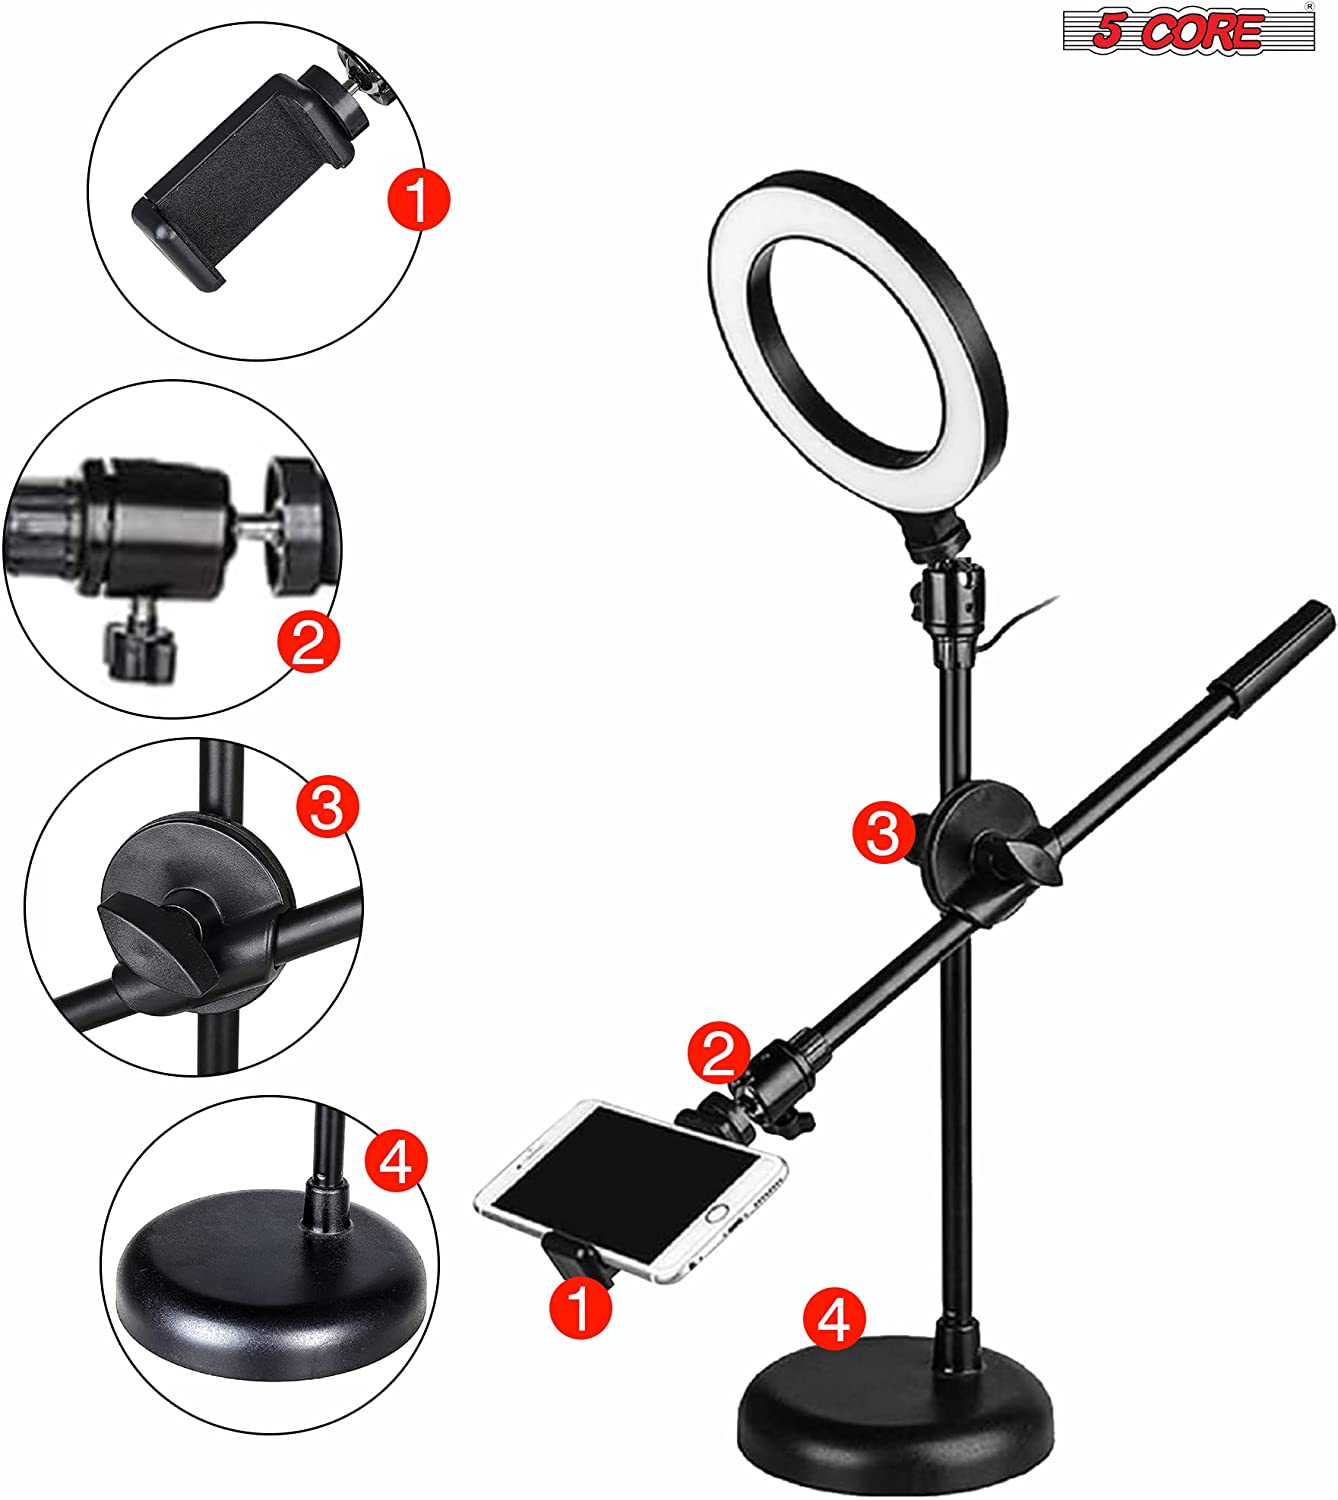 5 Core Ring Light 6 Inch W Phone Stand Adjustable Selfie Lights For Makeup Recording Podcast Streaming Content Creator Essentials - RING MOB PL